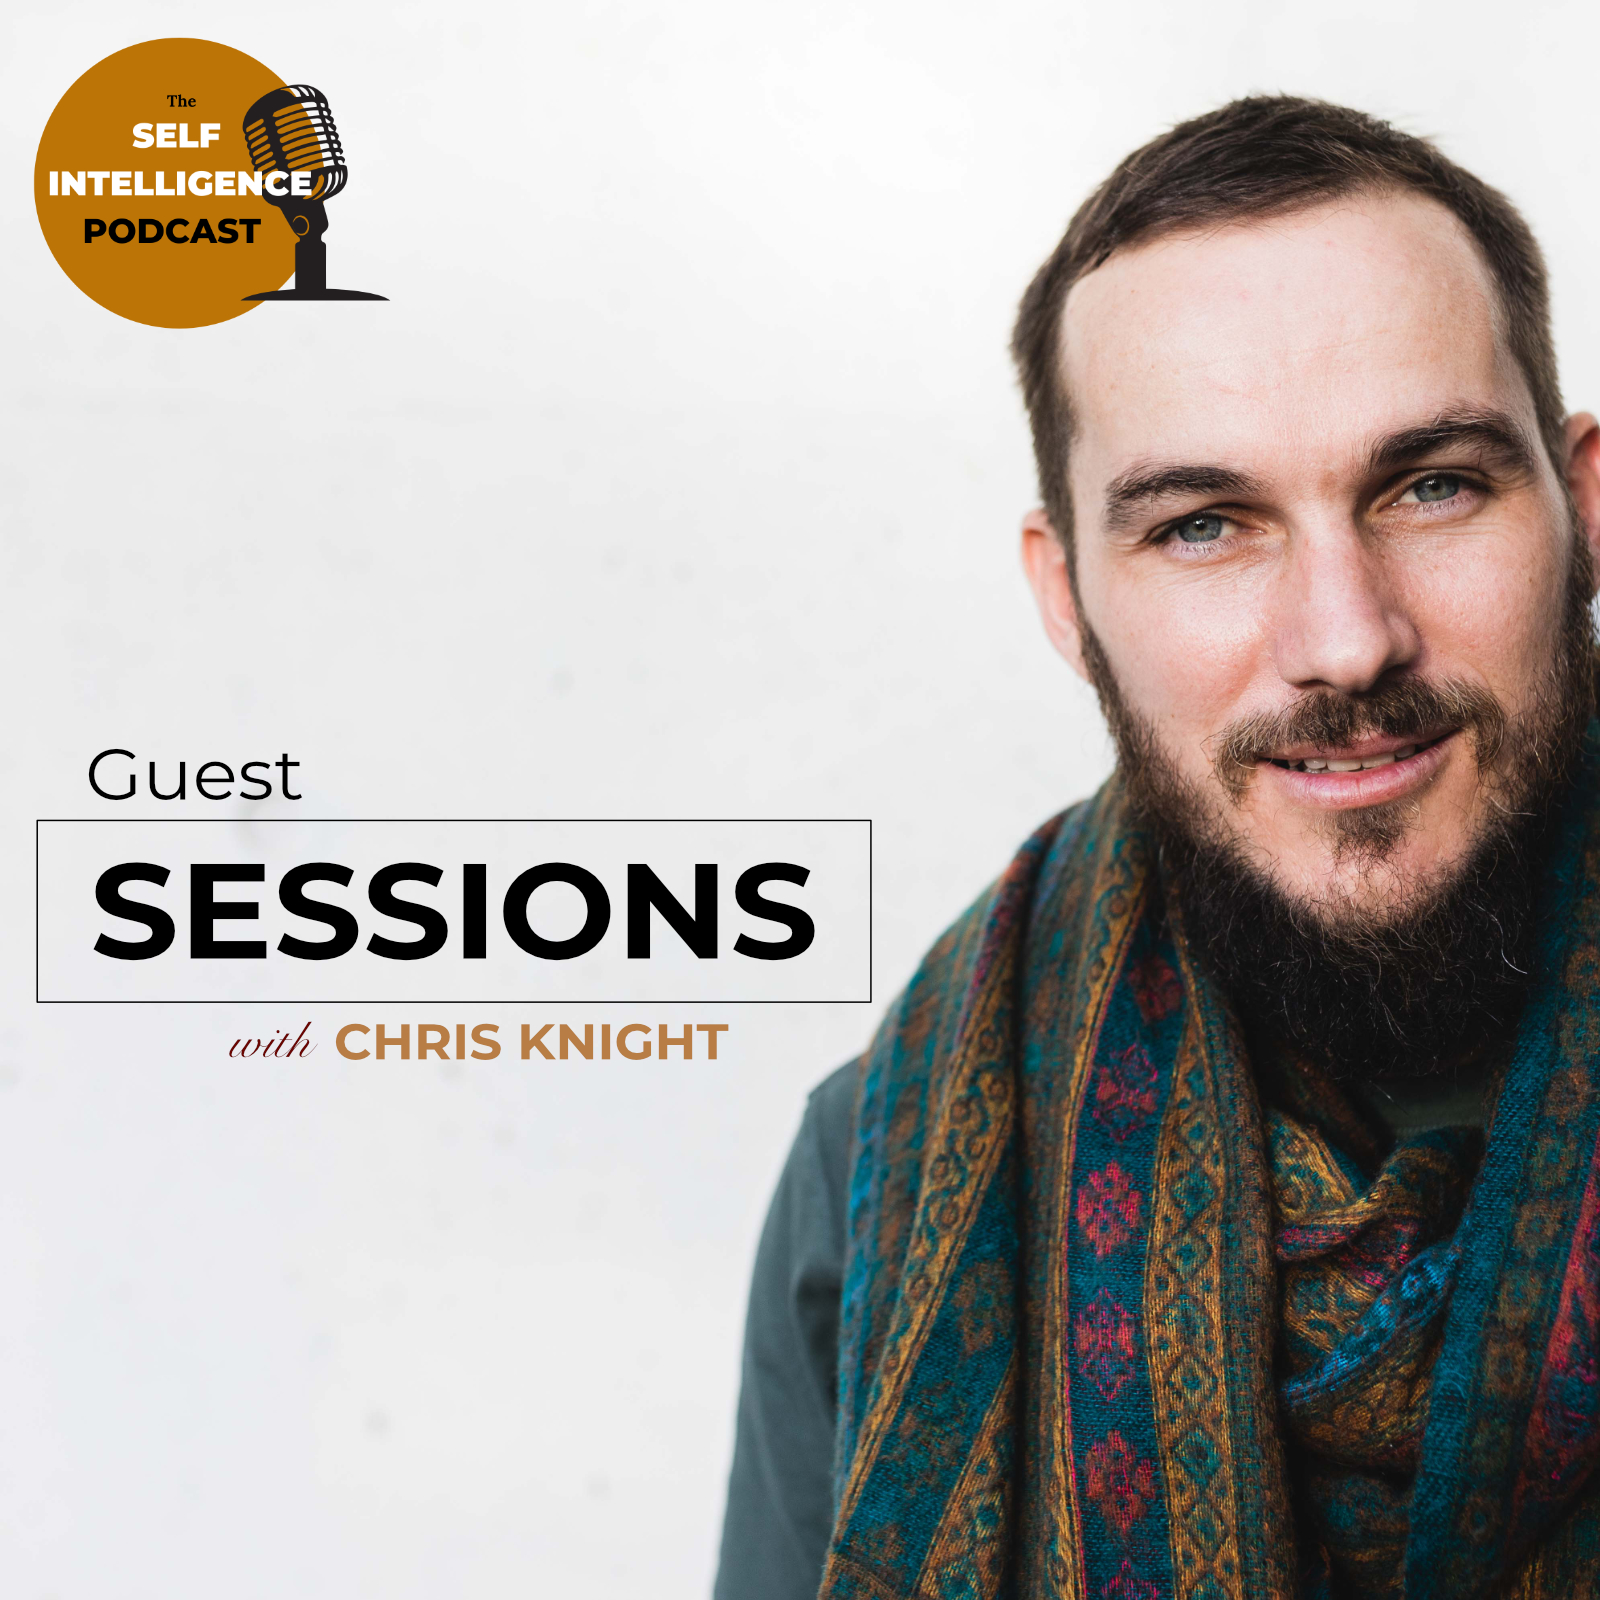 Podcast Sessions with chris knight